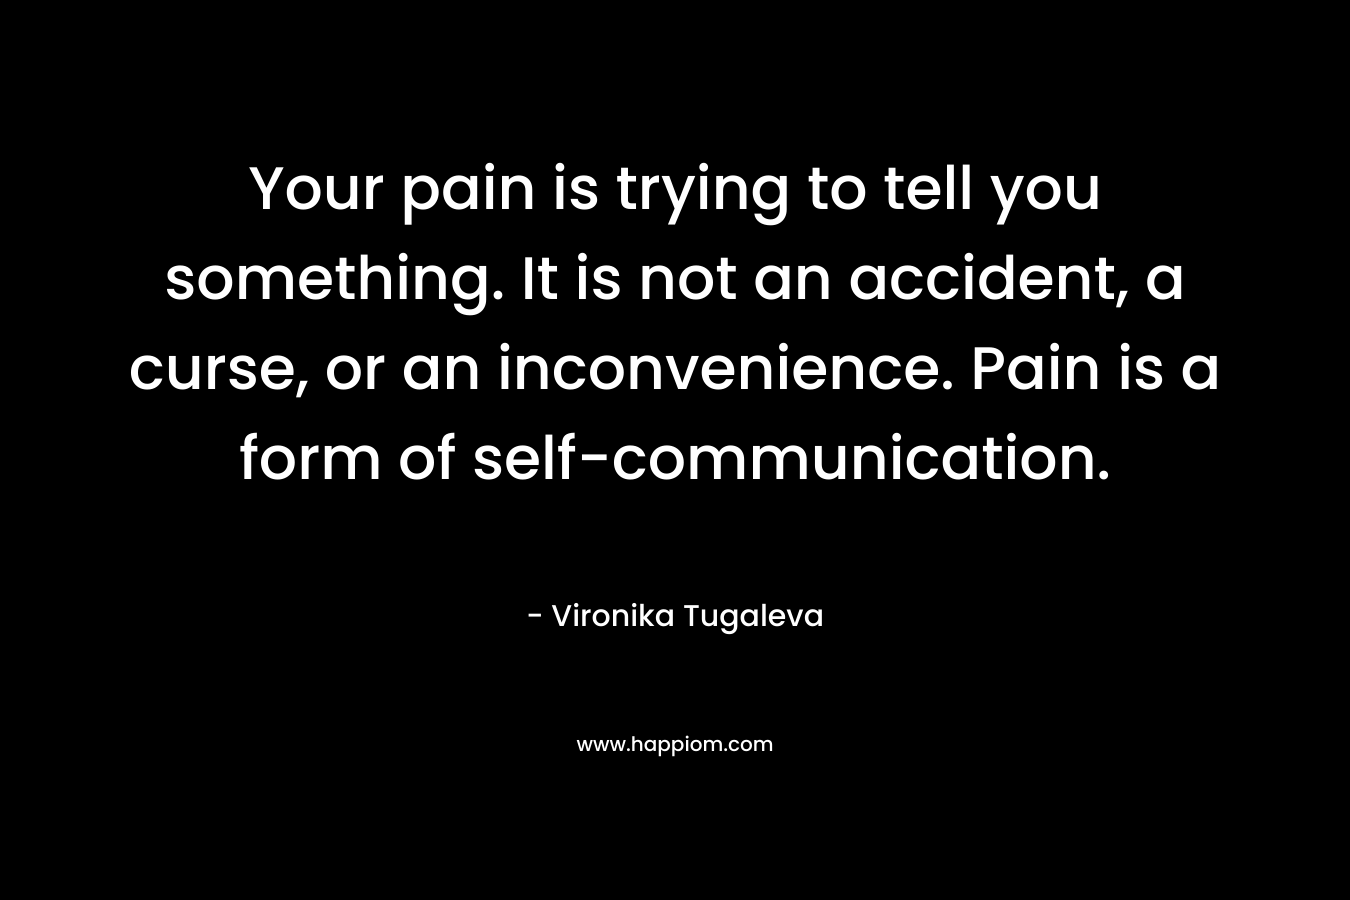 Your pain is trying to tell you something. It is not an accident, a curse, or an inconvenience. Pain is a form of self-communication.